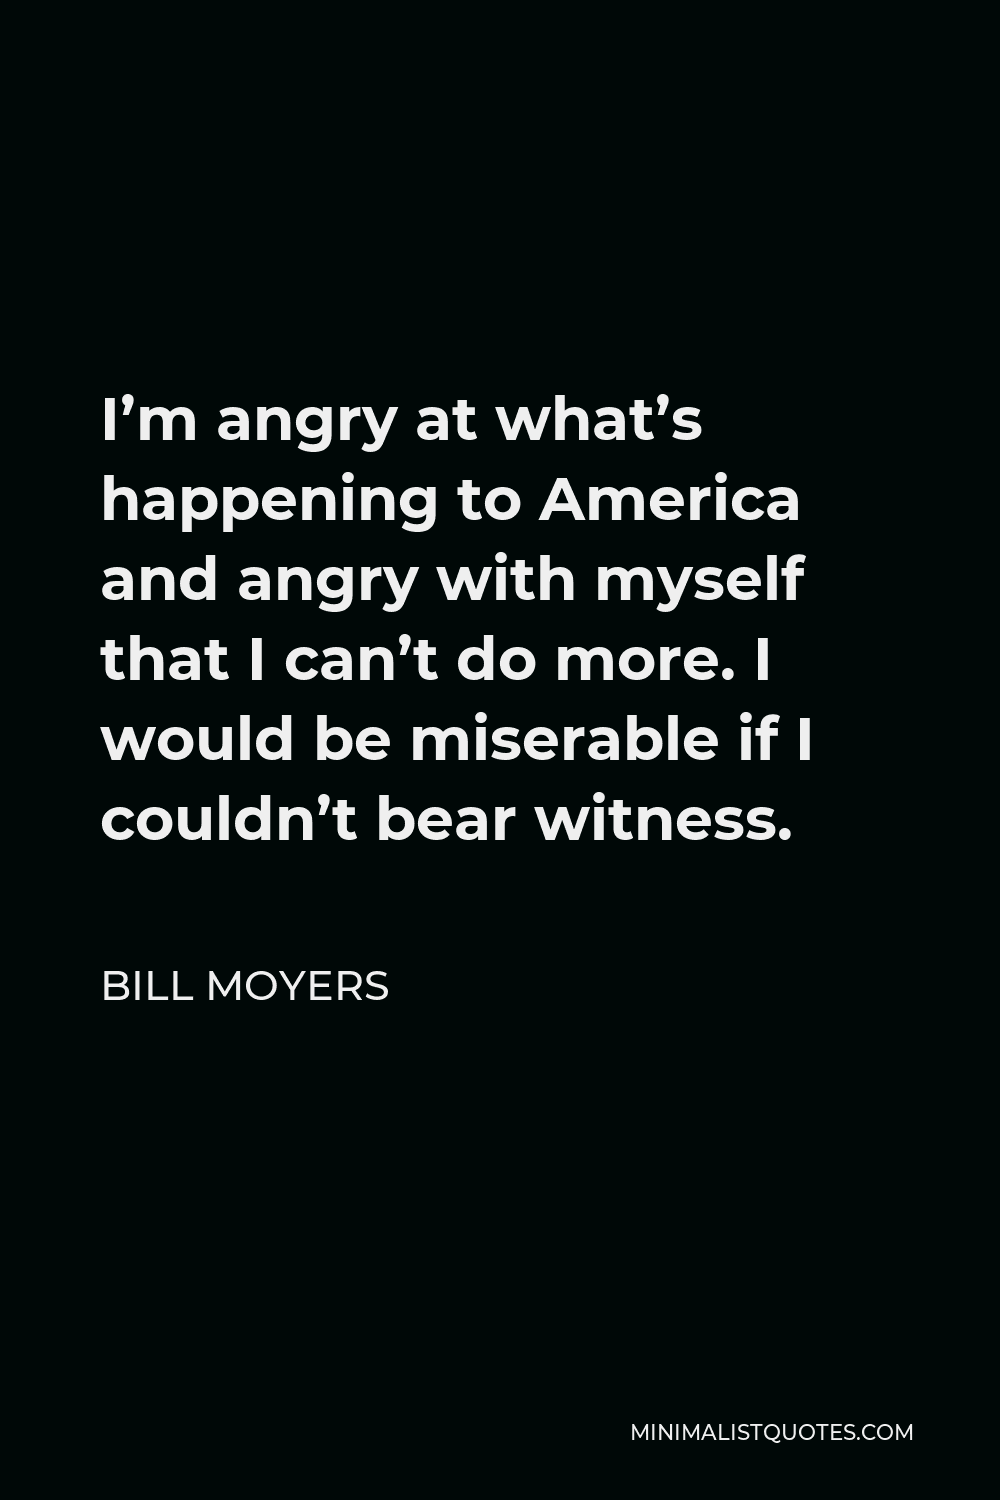 Bill Moyers Quote - I’m angry at what’s happening to America and angry with myself that I can’t do more. I would be miserable if I couldn’t bear witness.